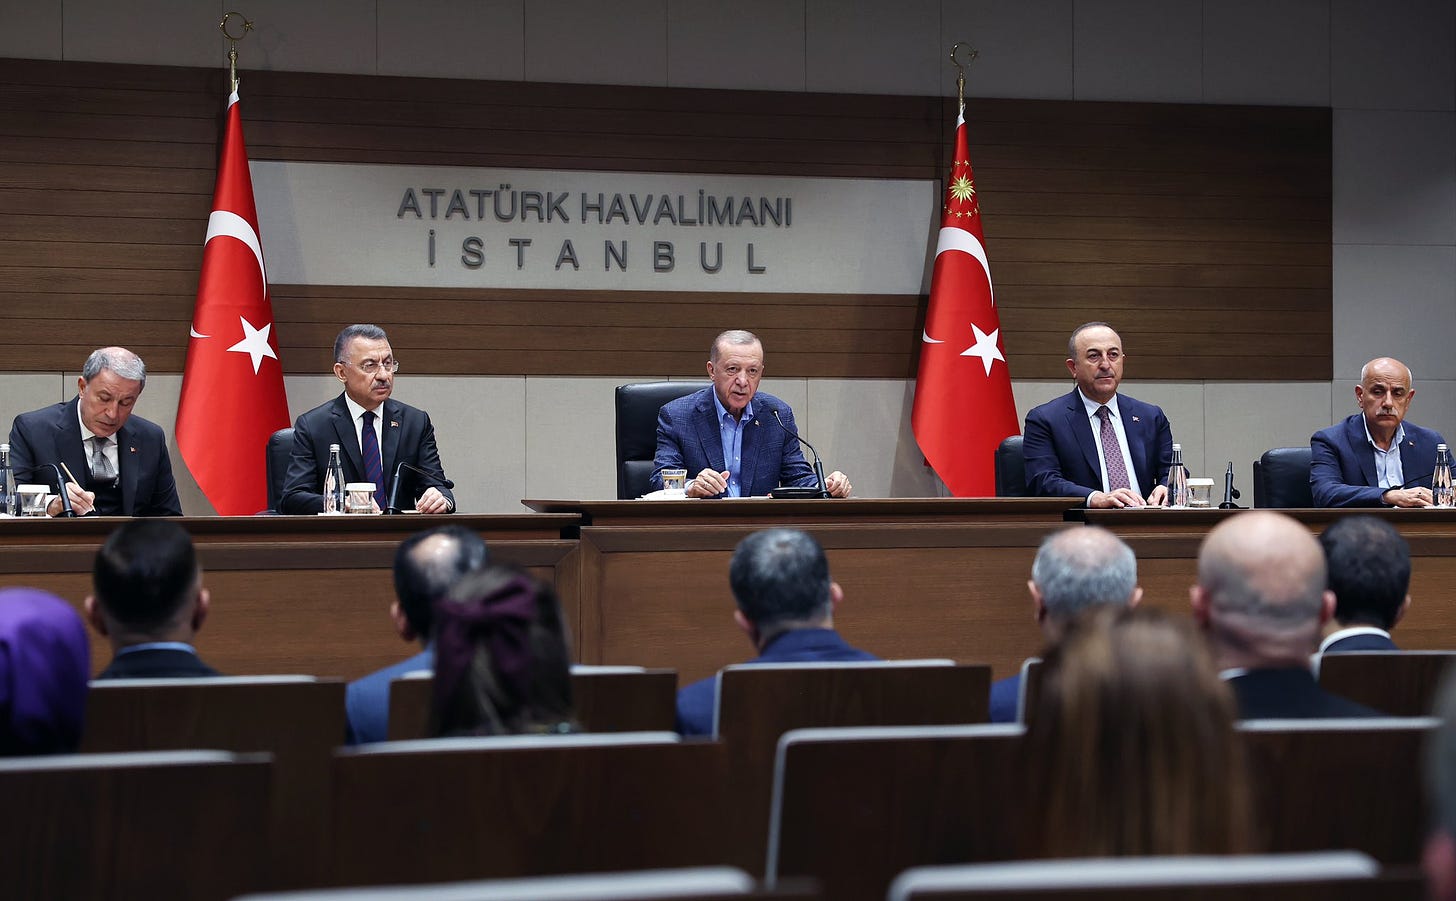 Turkish President Recep Tayyip Erdoğan speaking at a press conference after the Istanbul attack (Image: Twitter/@trpresidency)